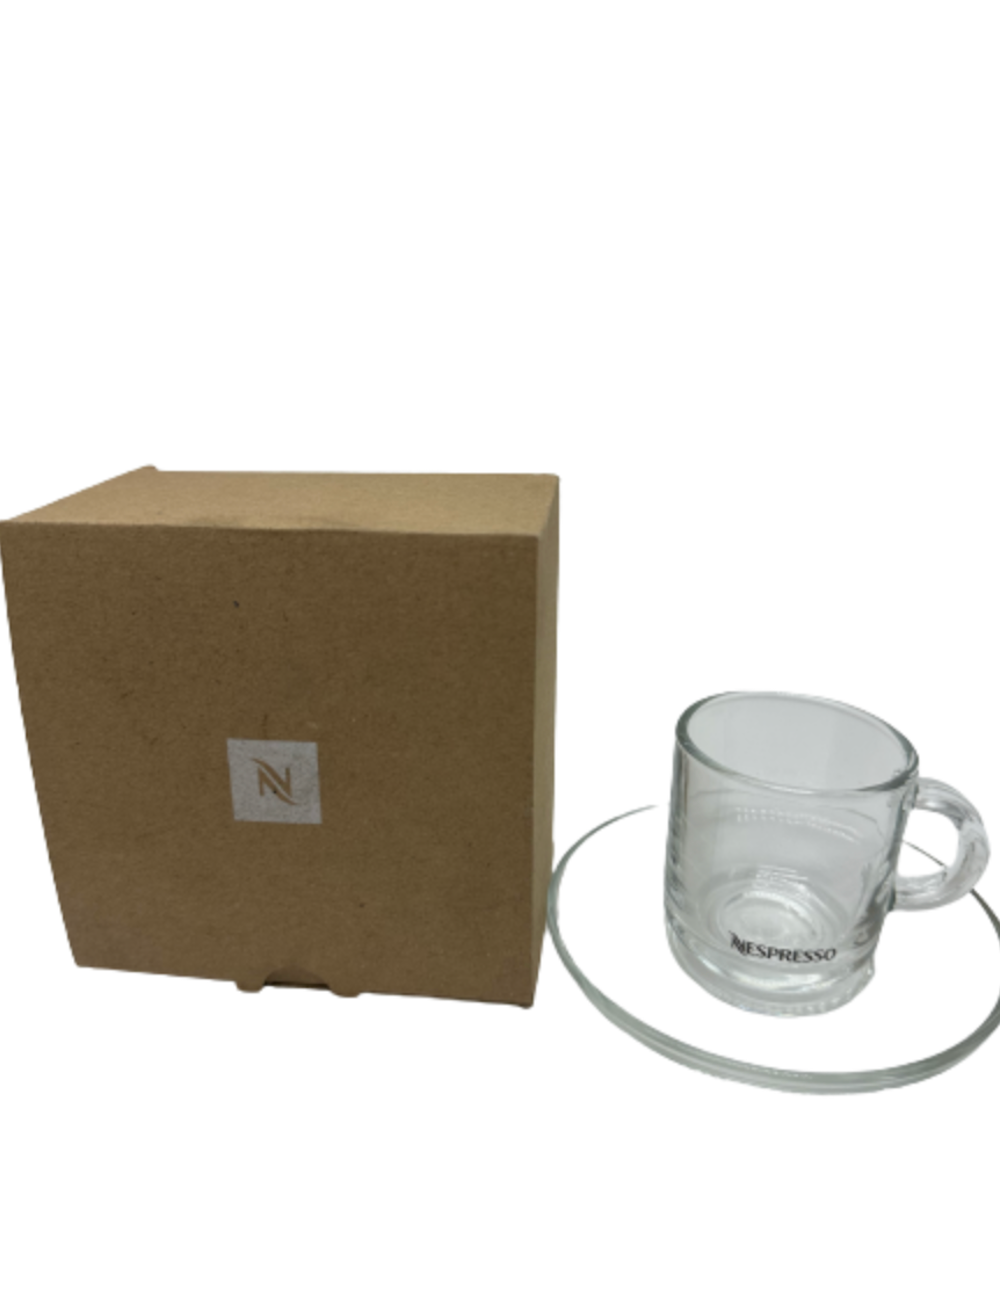 Nespresso Vertuo Espresso Coffee Glass Cup with Saucer New with Box